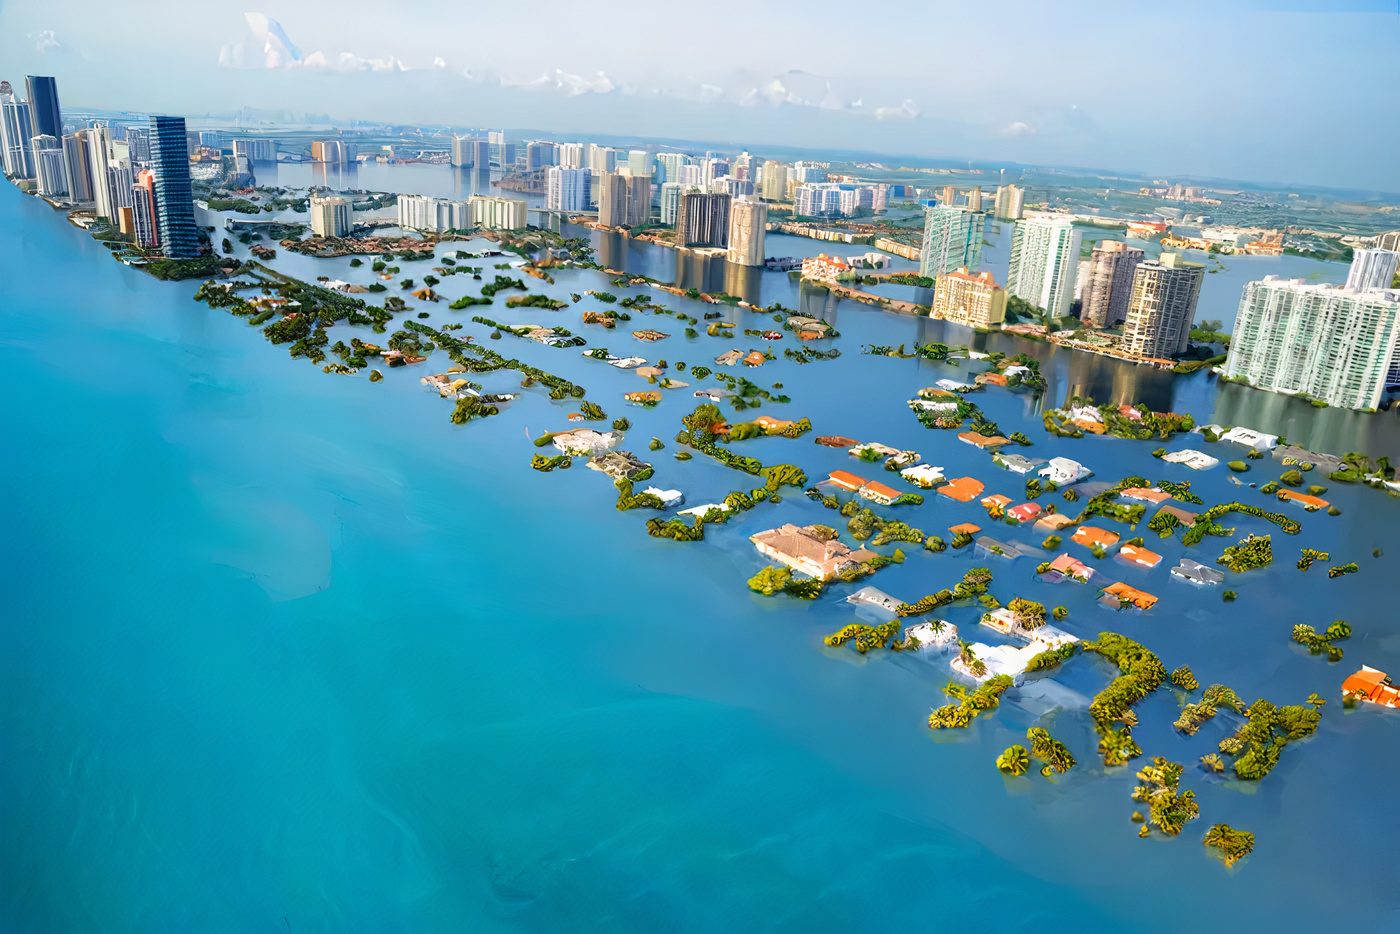 Climate Change in Florida: What to Expect in the Next 20 Years